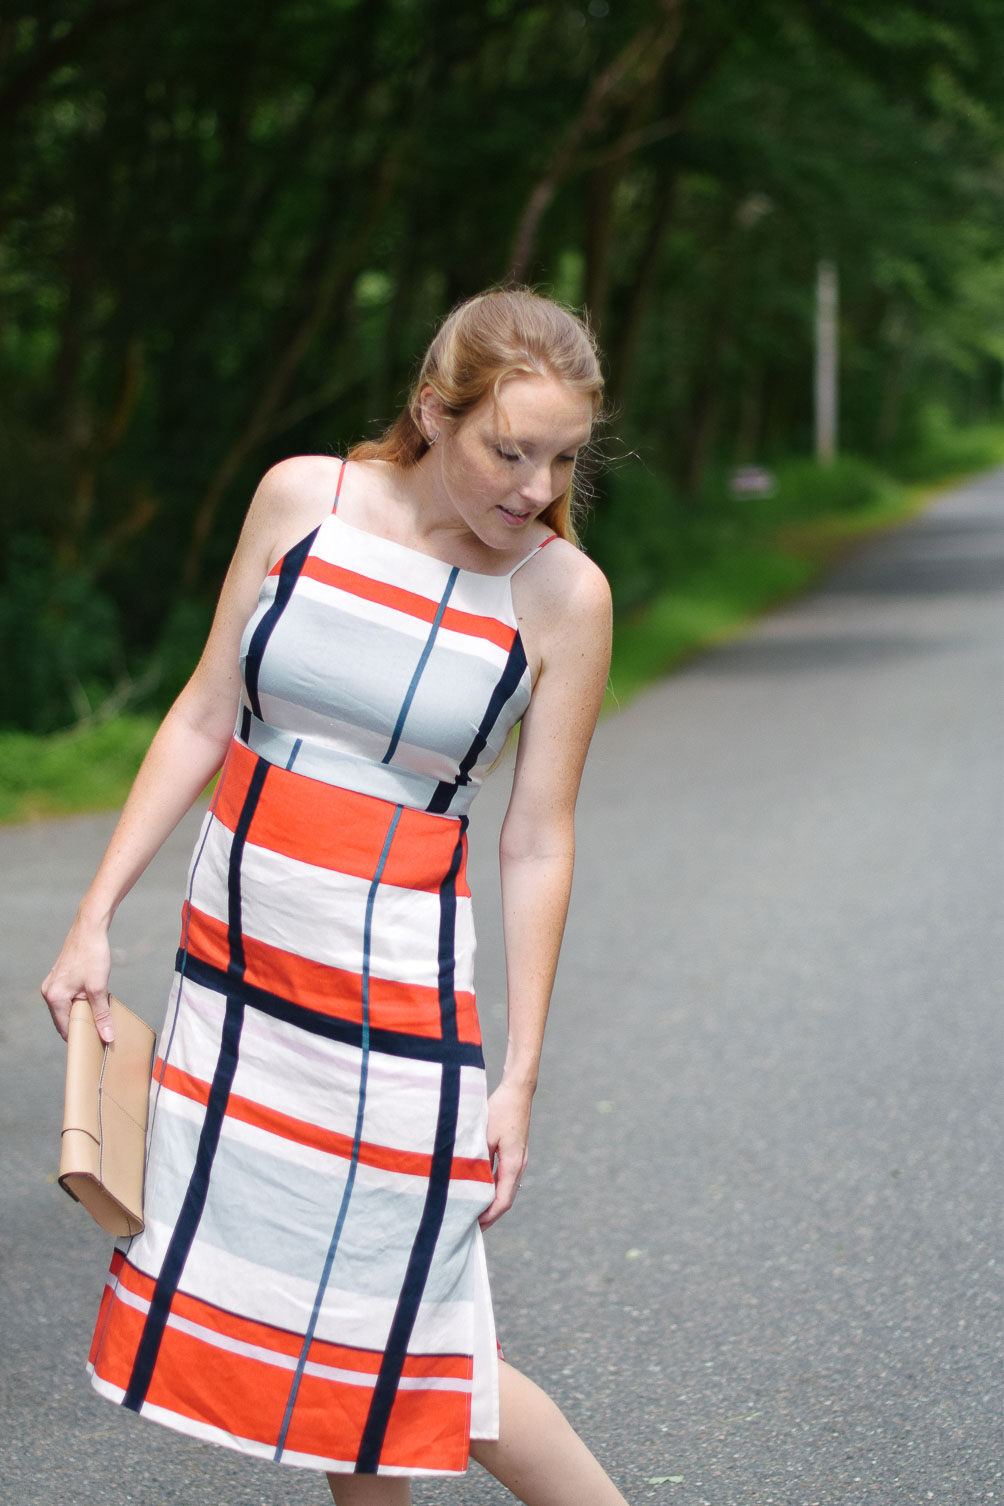 styling an Ann Taylor striped linen dress with cork wedge sandals for easy summer style